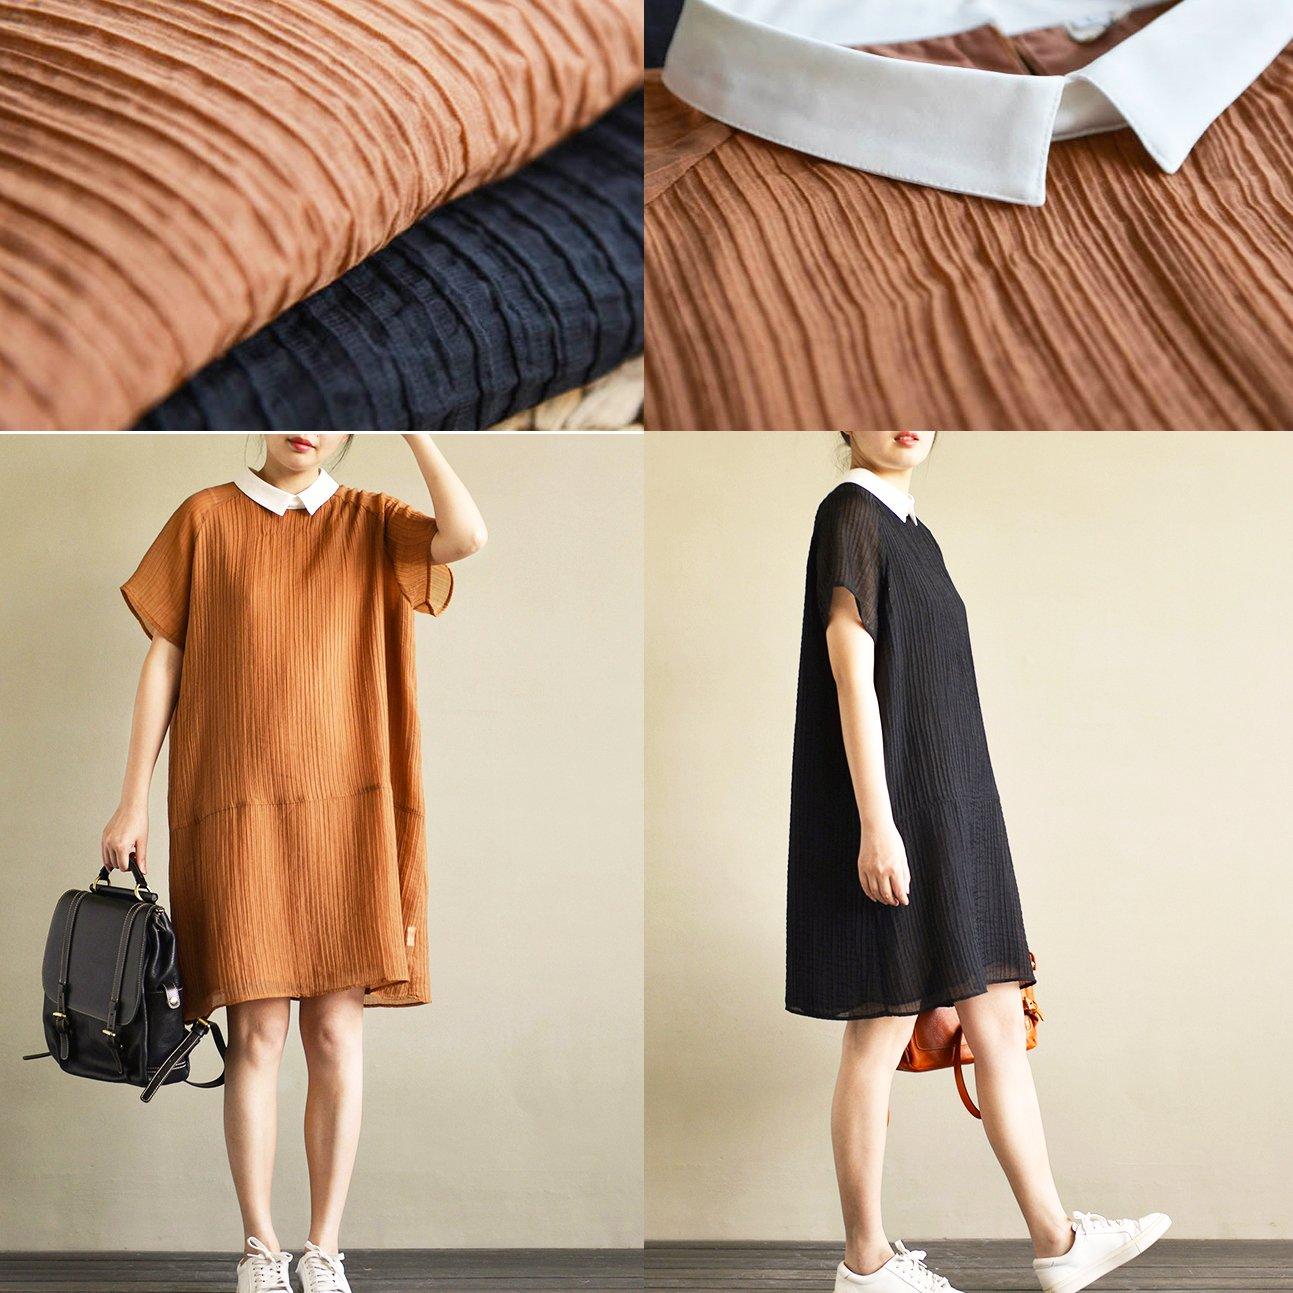 2017 brown patchwork chiffon sundress oversize layered casual dresses turn-down collar shift dress - Omychic